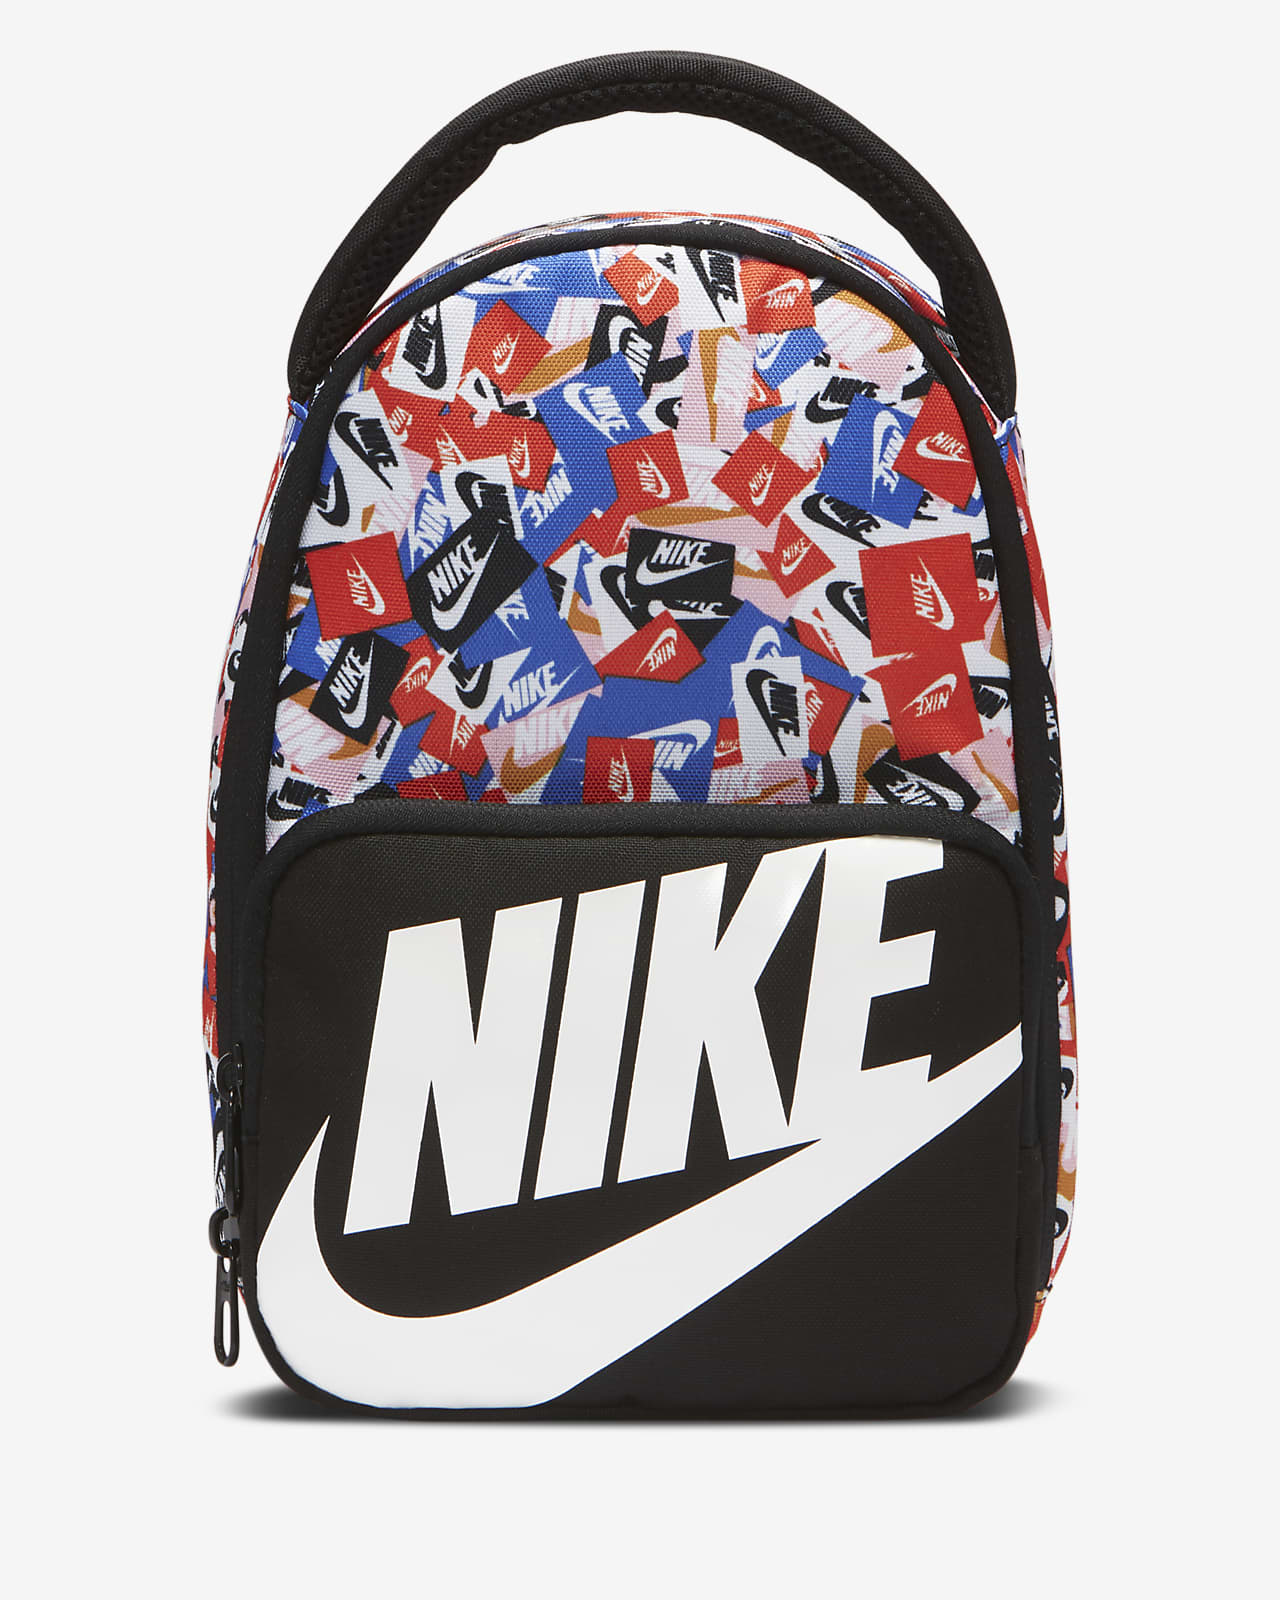 nike lunch box and backpack